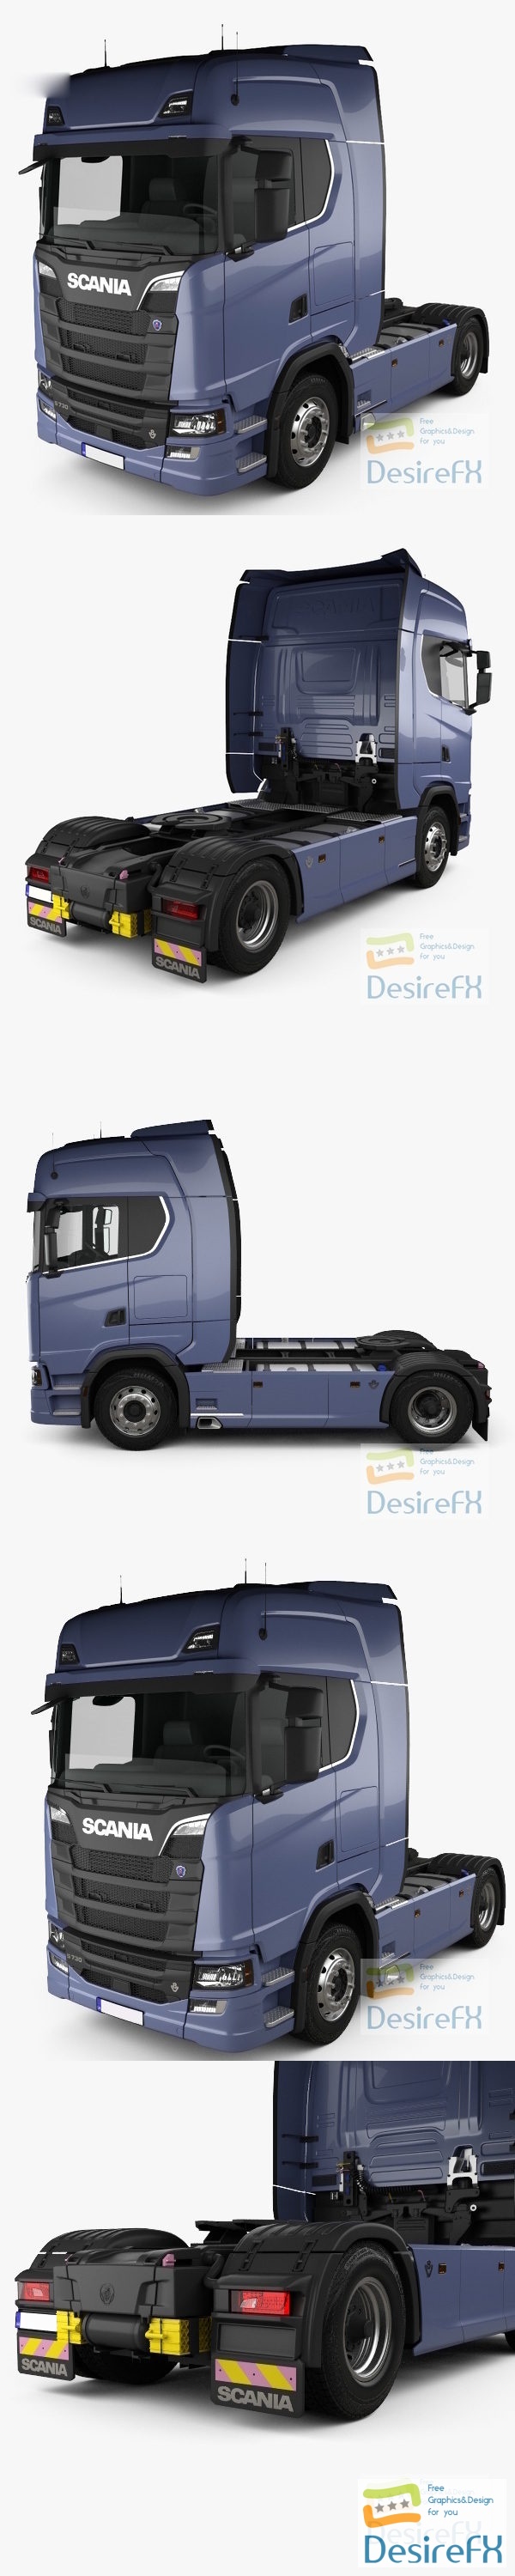 Scania S 730 Highline Tractor Truck 2-axle 2016 3D Model